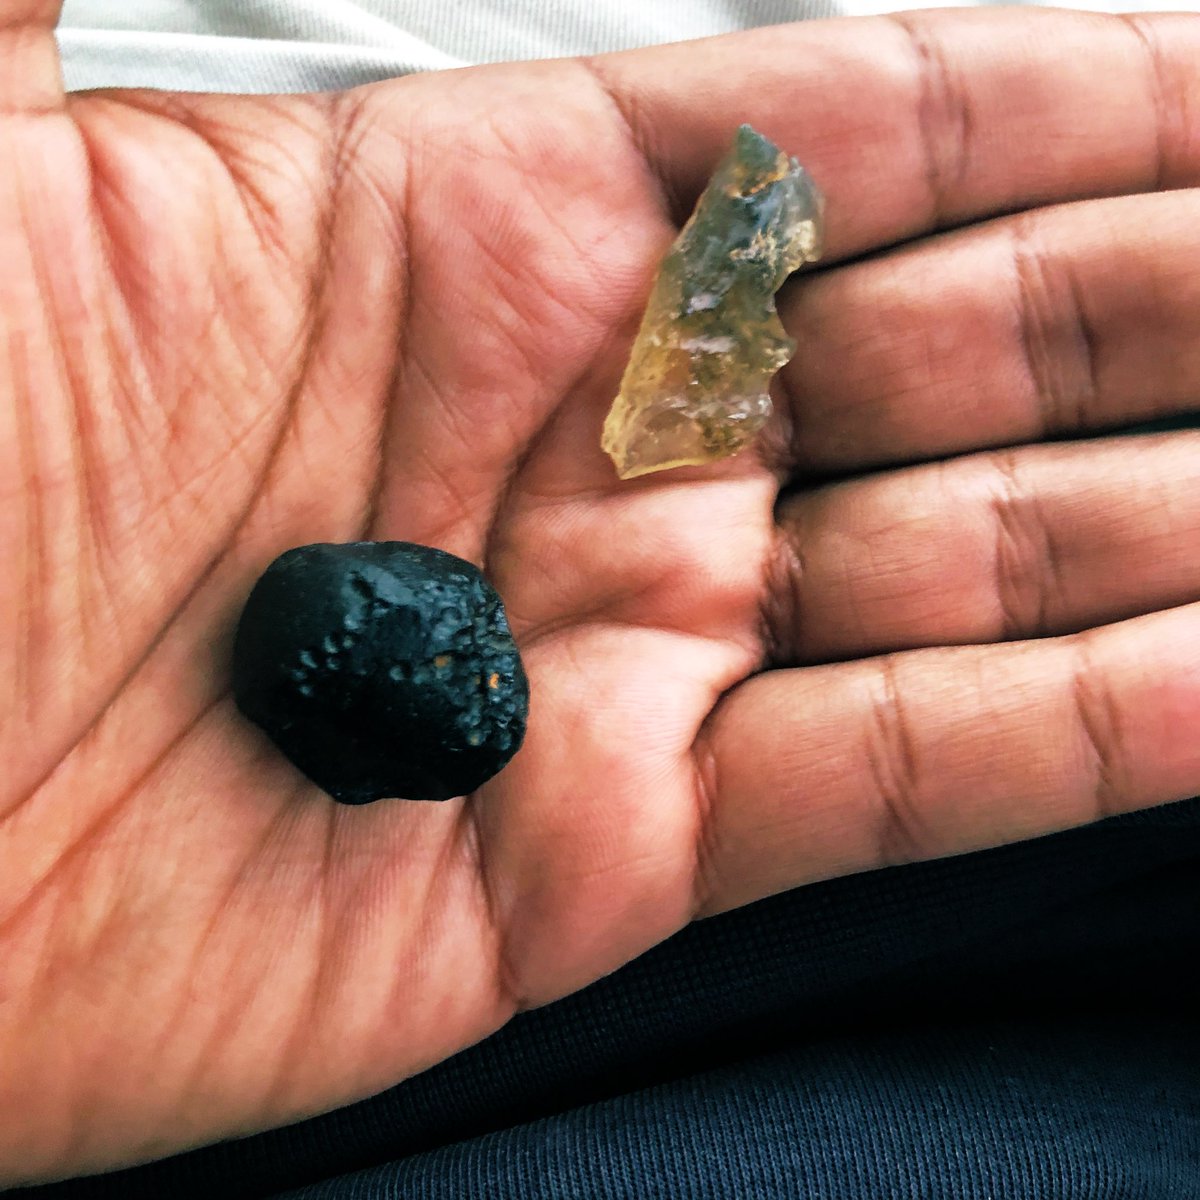 Tektite and Libyan Desert Glass … because after Moldavite why not??